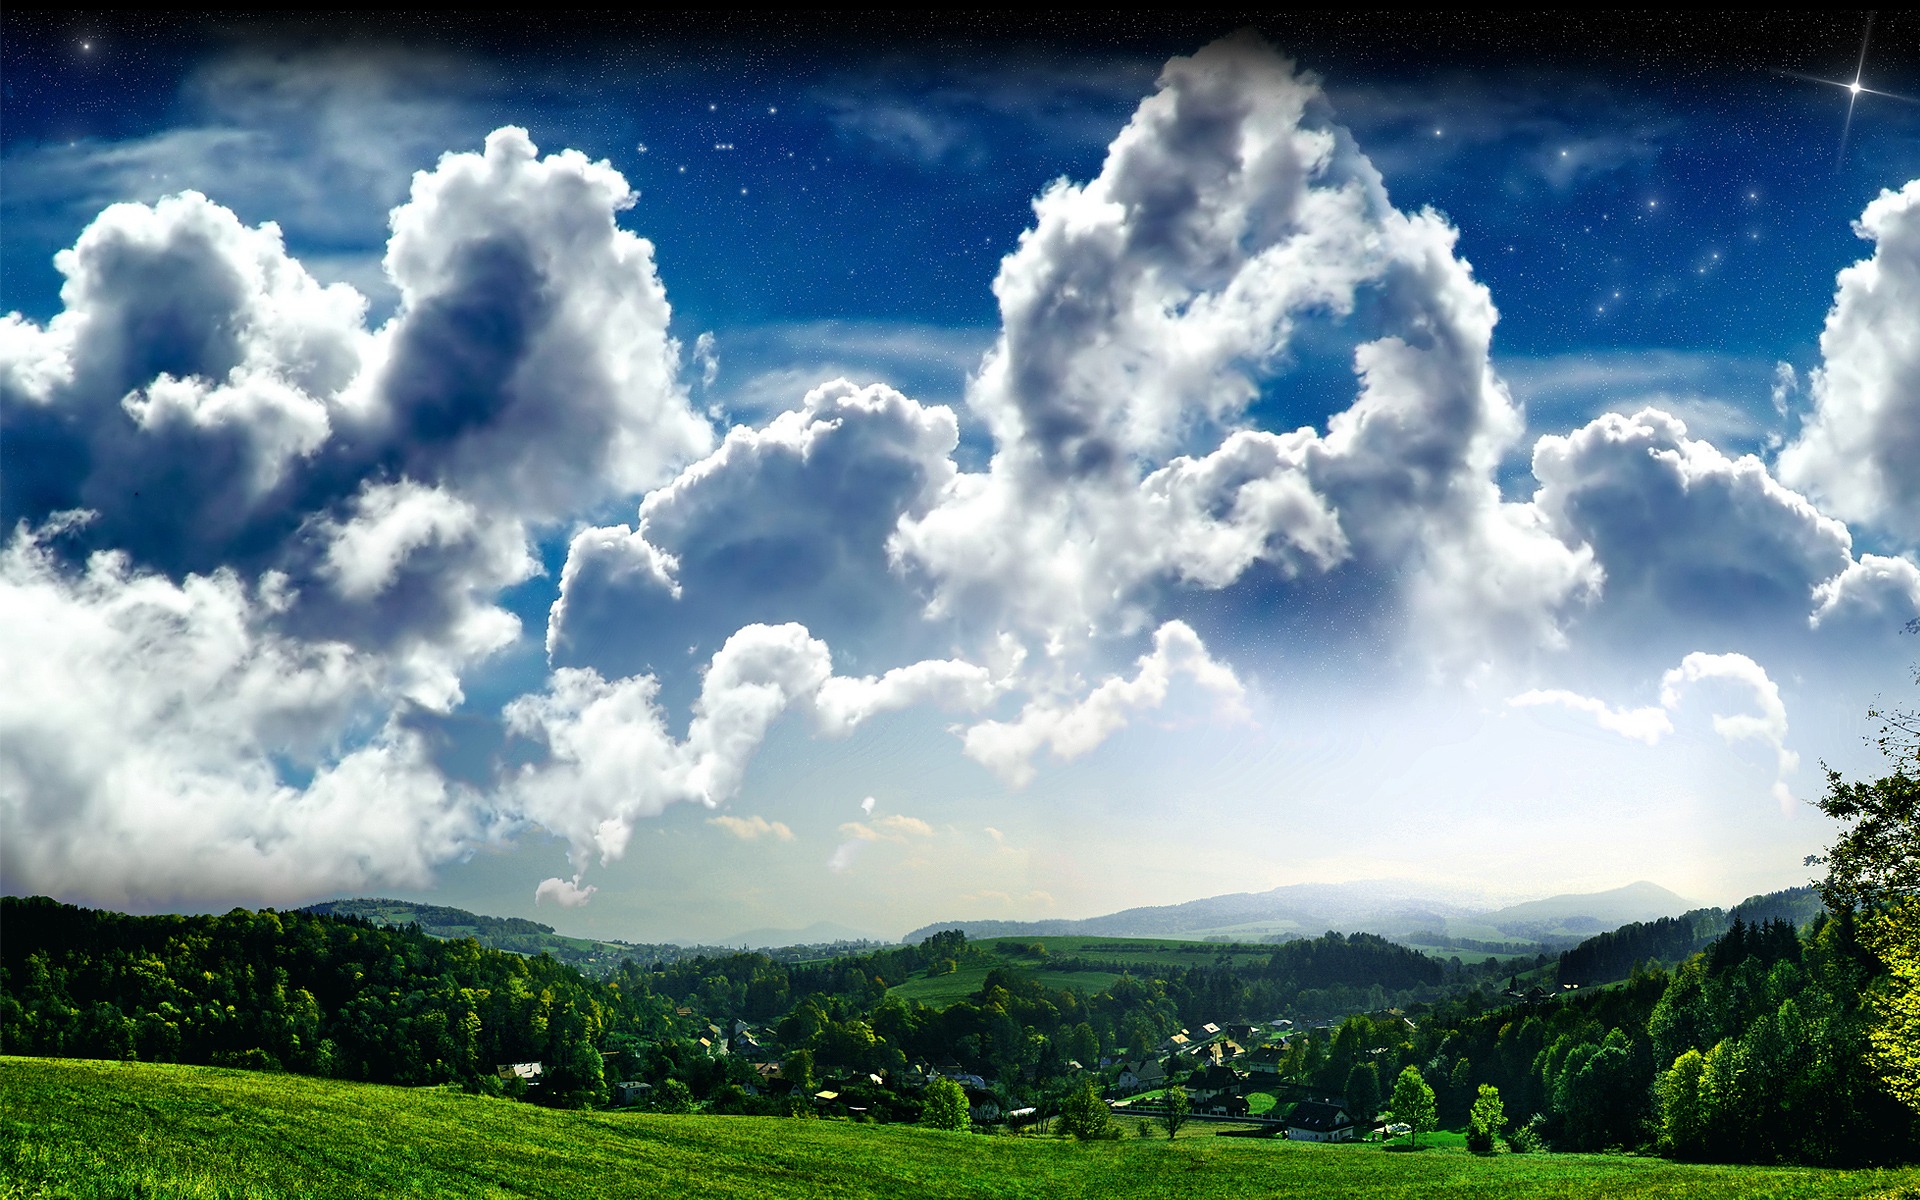 beautiful cloud scenery wallpaper With Resolutions 19201200 Pixel